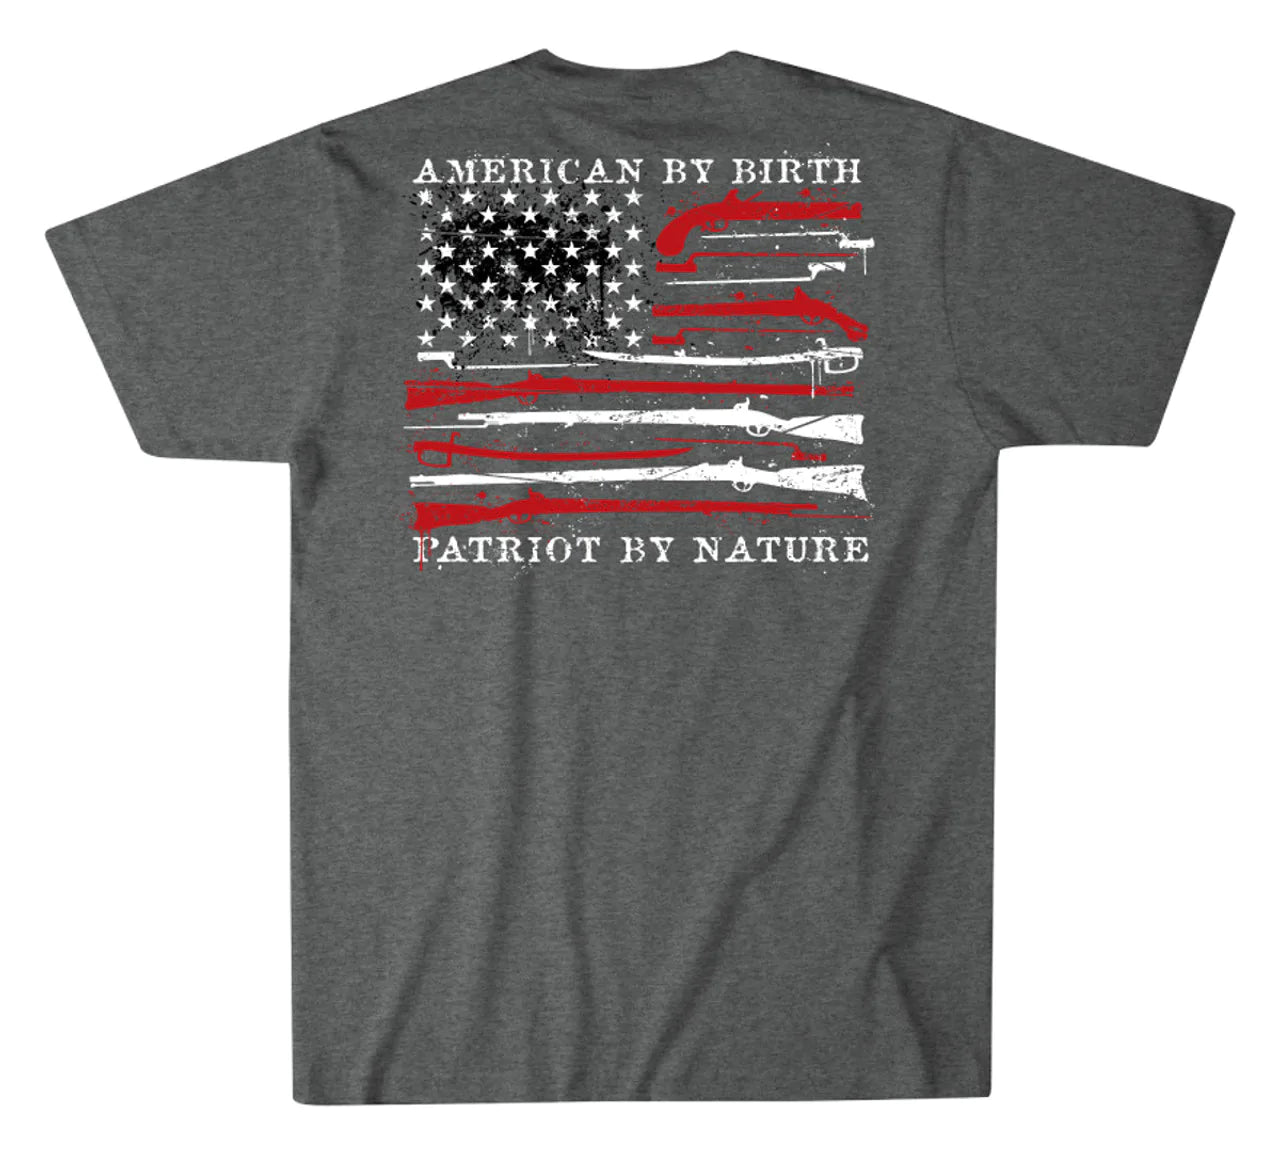 Howitzer By Birth T-Shirt - Harley Davidson of Quantico